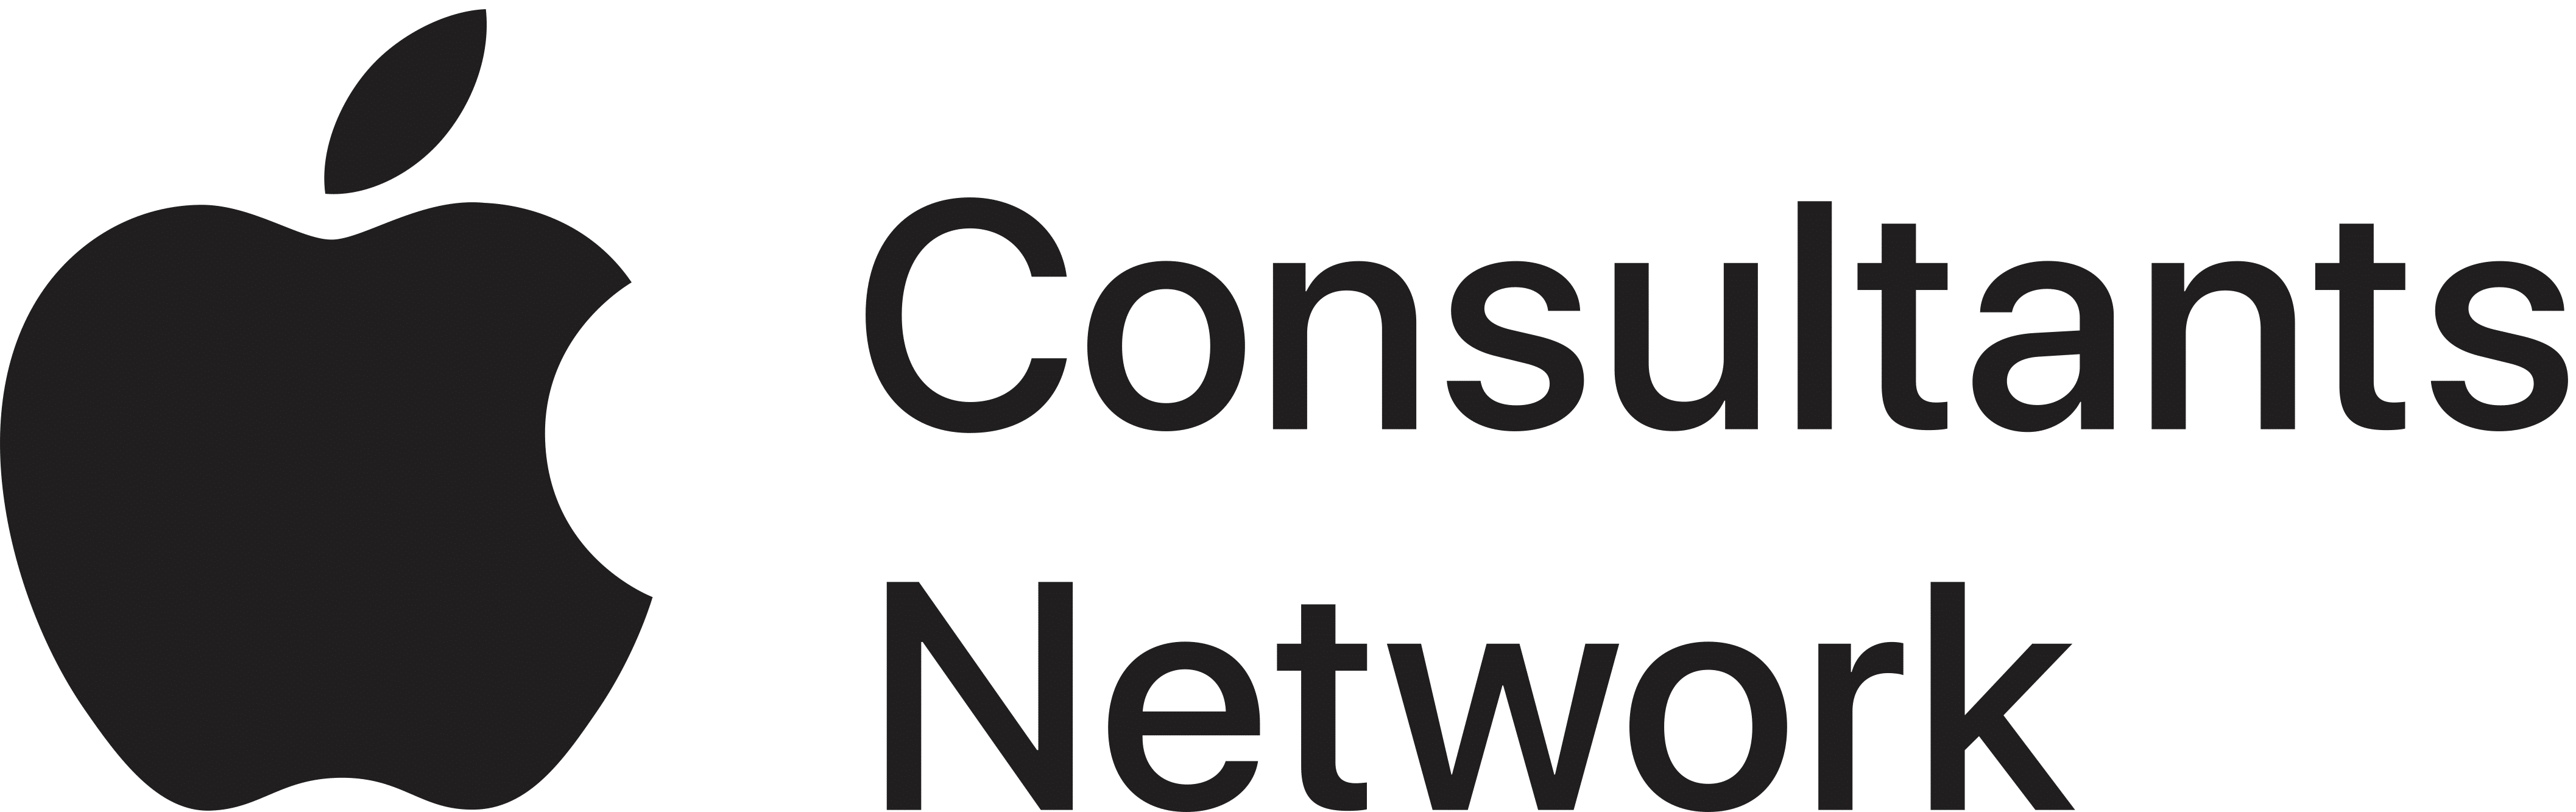 Certification Consultant network apple